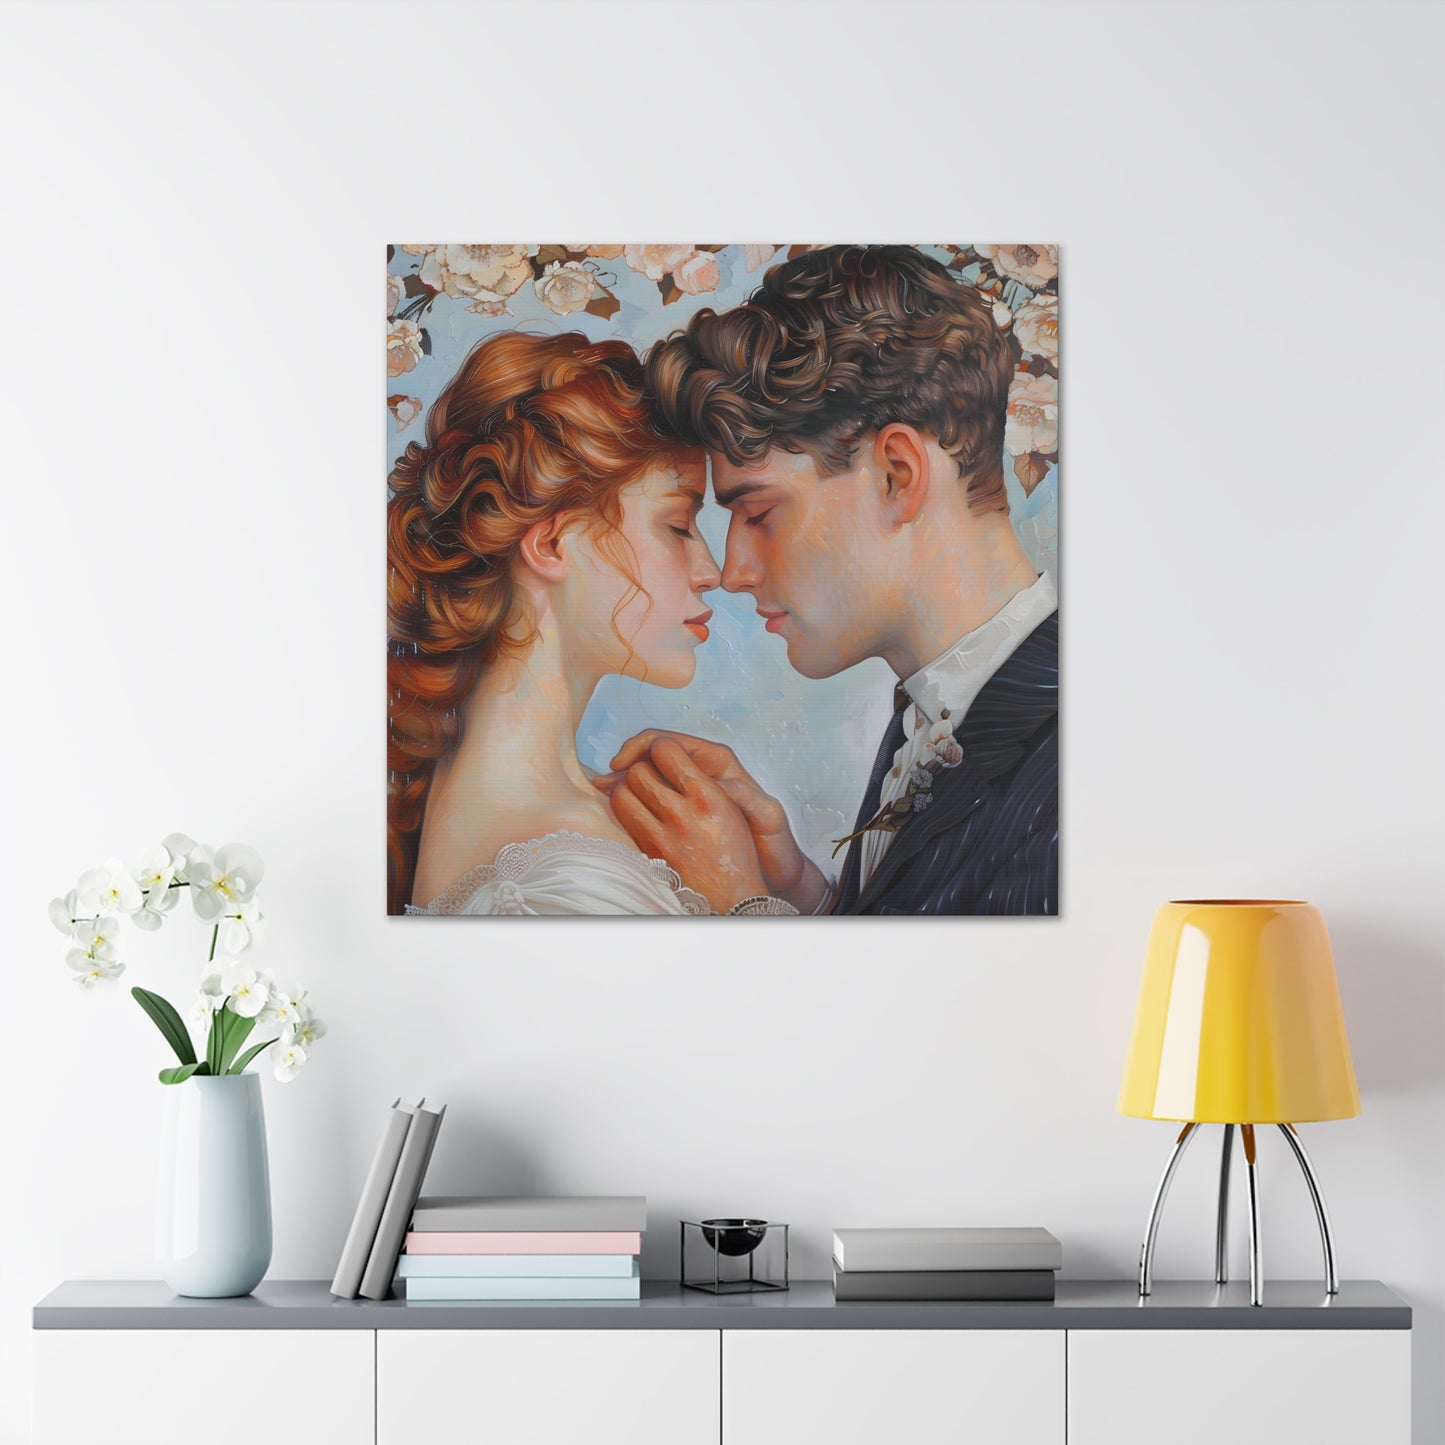 Evelyn Romantique, Intertwined Souls, Exclusive Canvas Print